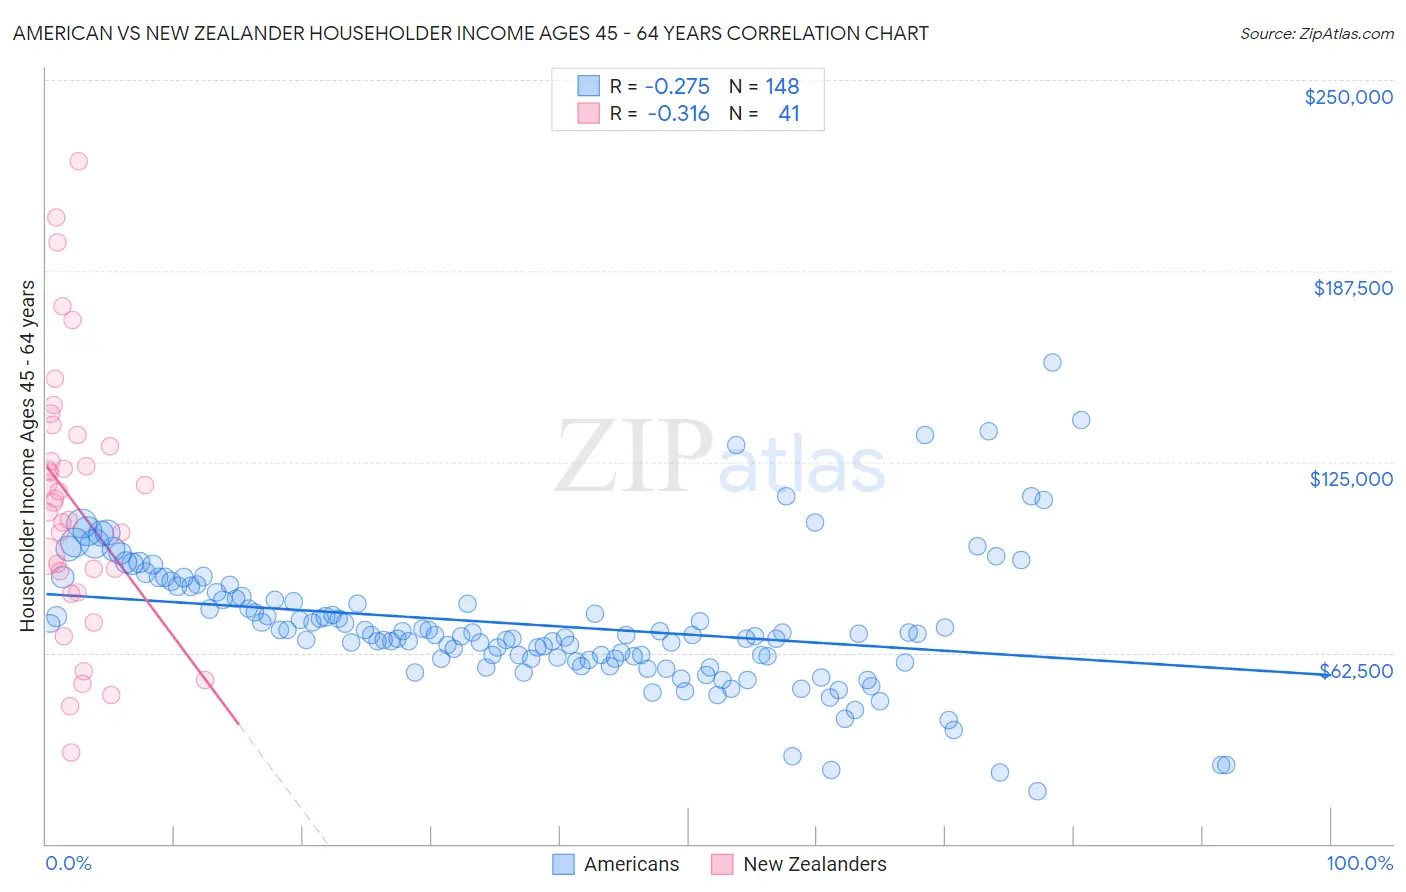 American vs New Zealander Householder Income Ages 45 - 64 years